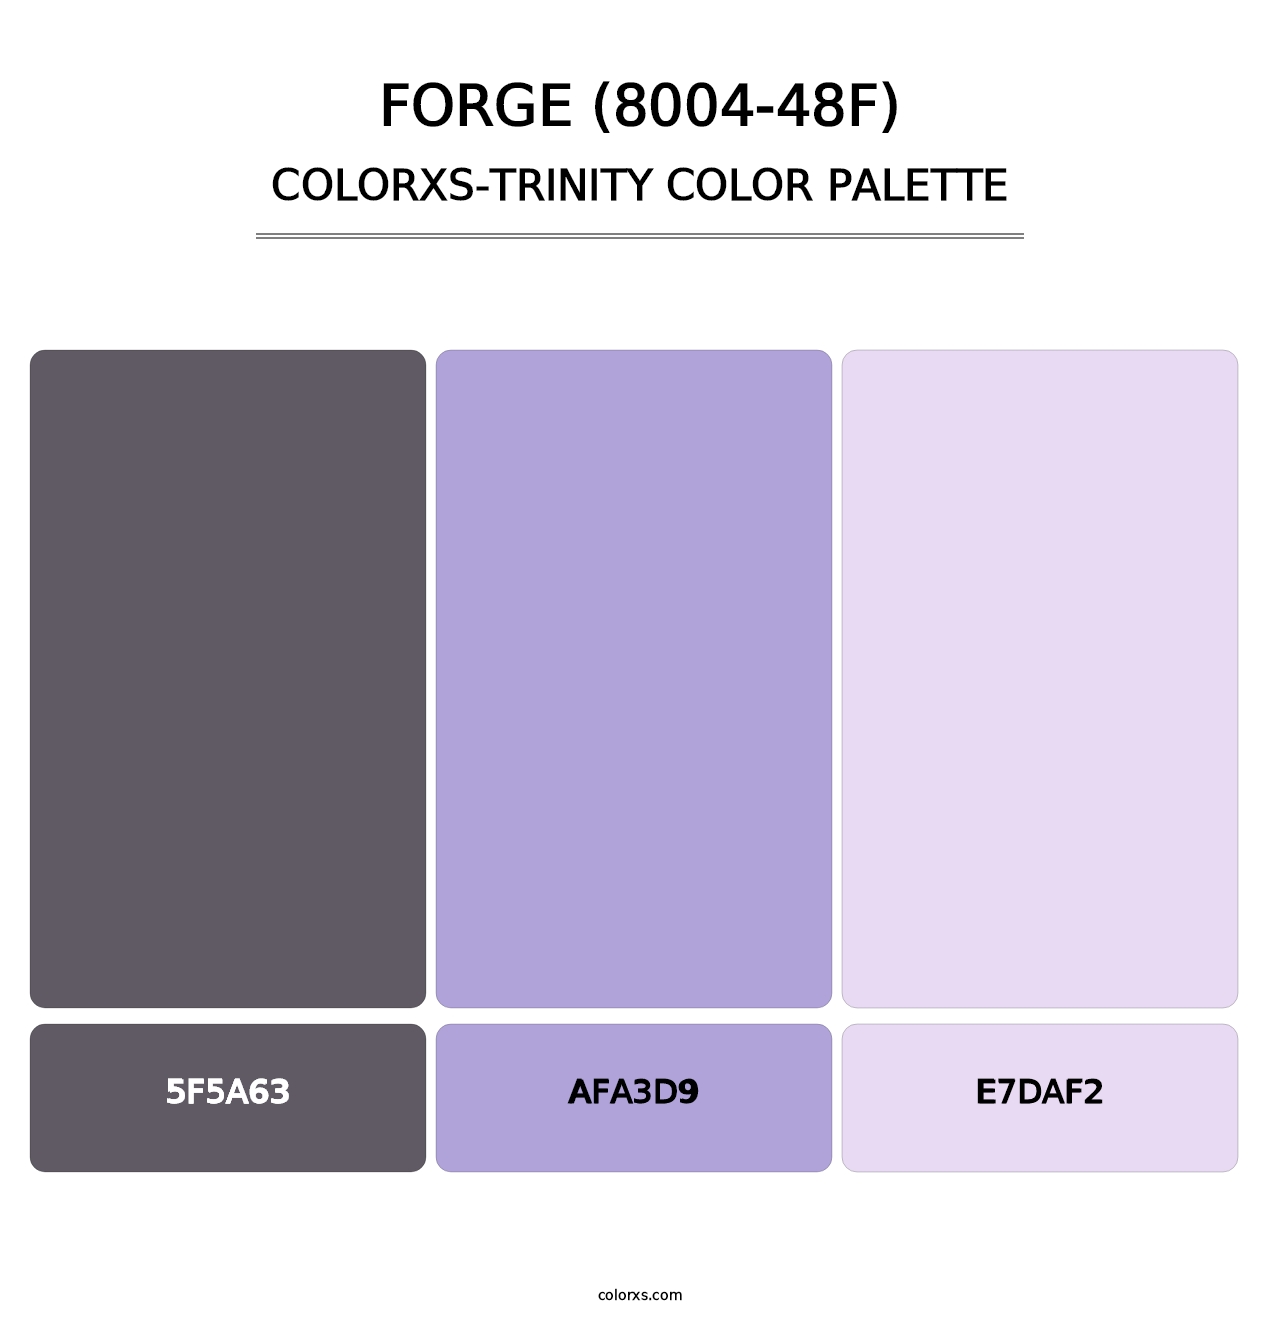 Forge (8004-48F) - Colorxs Trinity Palette